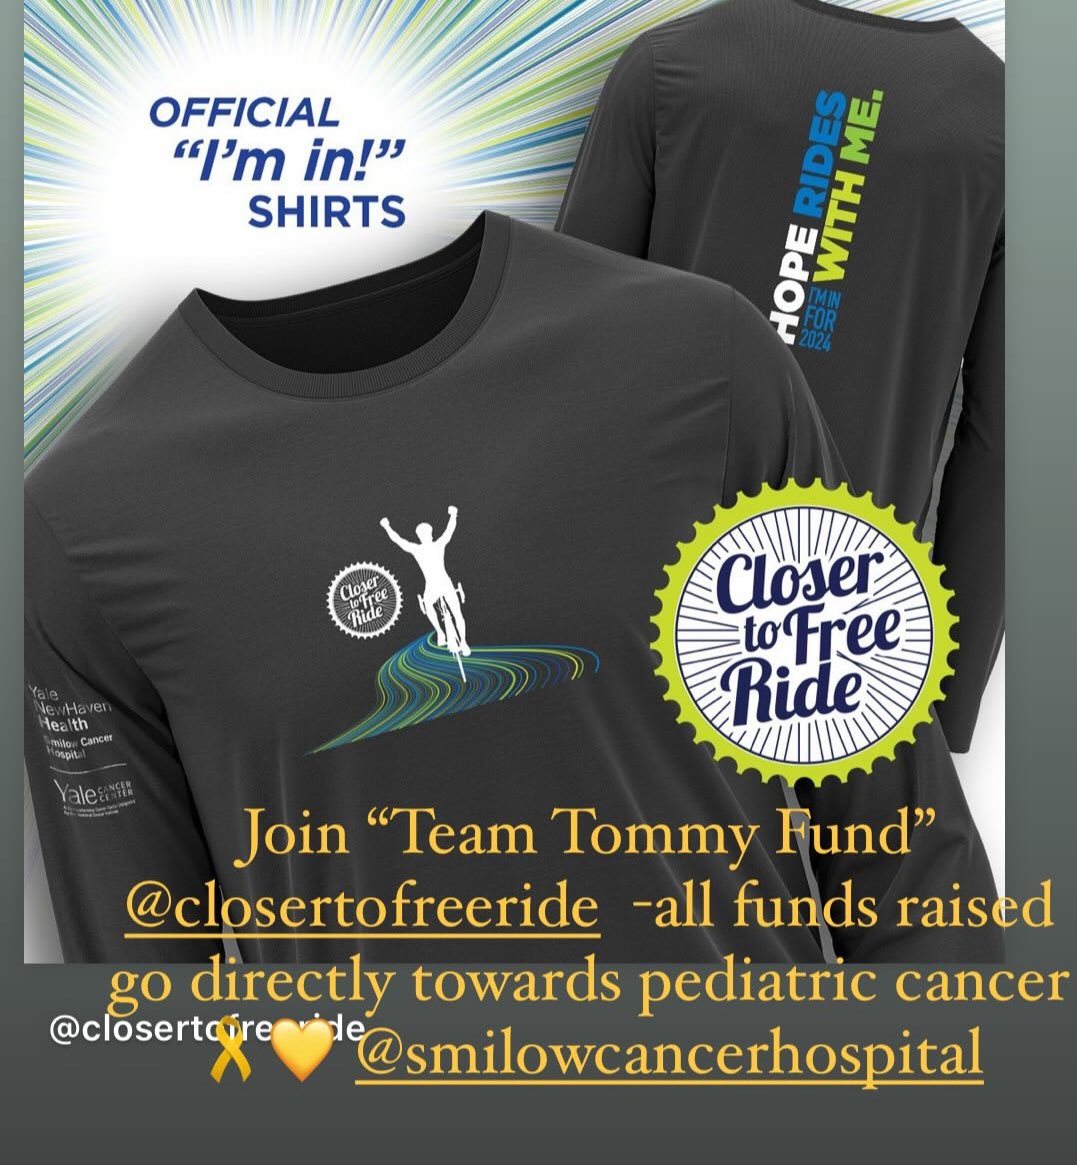 Join “Team Tommy Fund” @CTFRide - all funds go directly towards pediatric cancer 🎗️💛 @SmilowCancer 

Registration opens March 10!